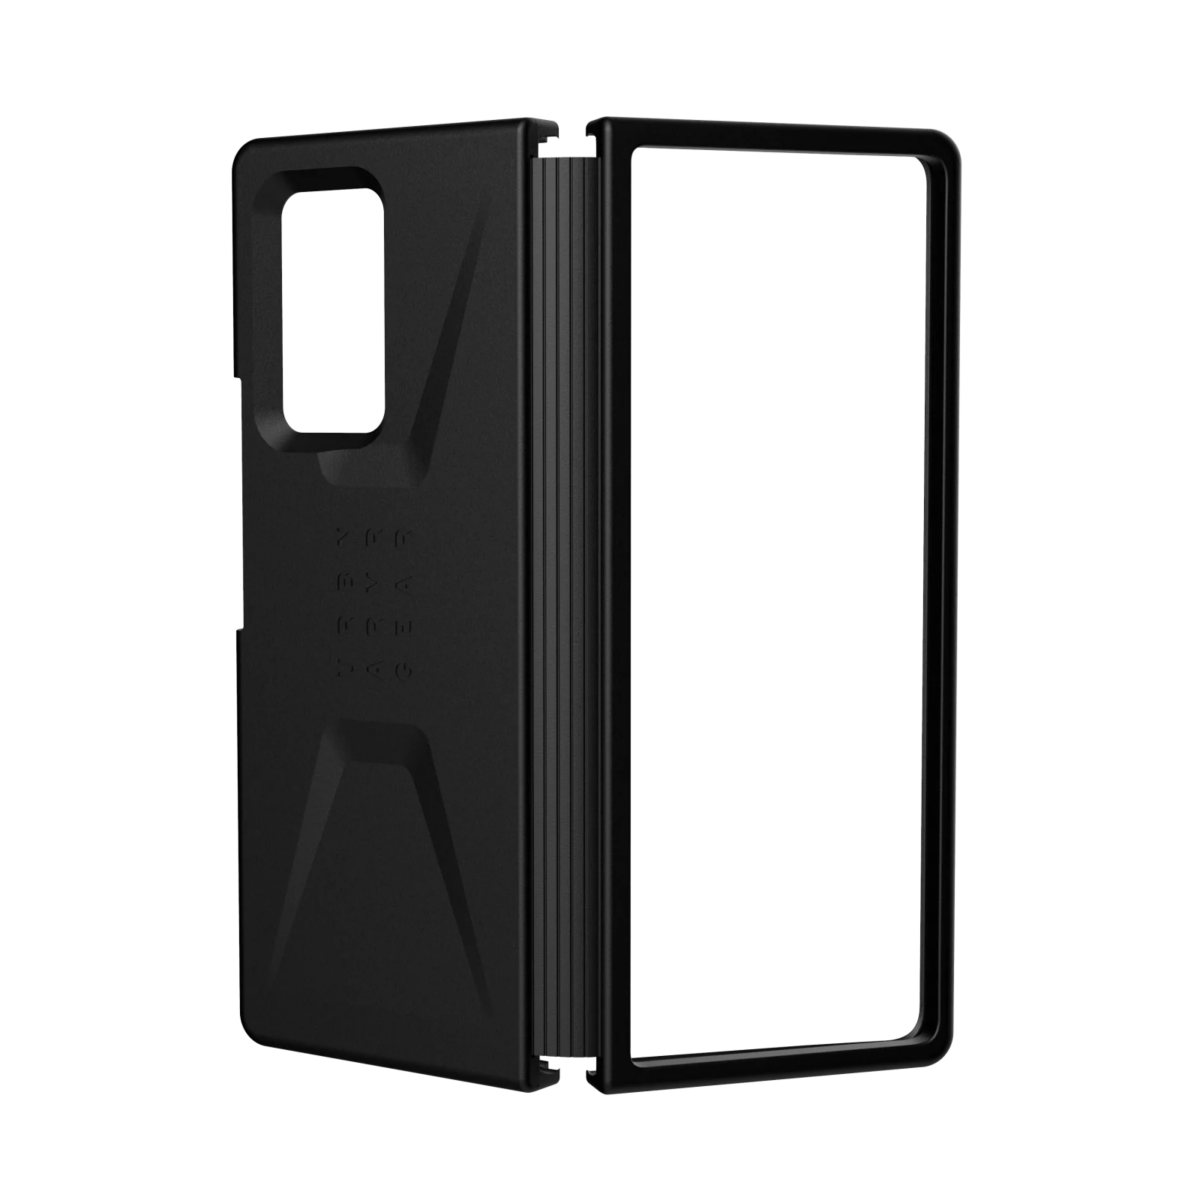 UAG's Galaxy Z Fold 2 case has the distinct advantage of covering the hinge and part of the front screen. If you're worried about actually dropping your device, this case will offer some protection.